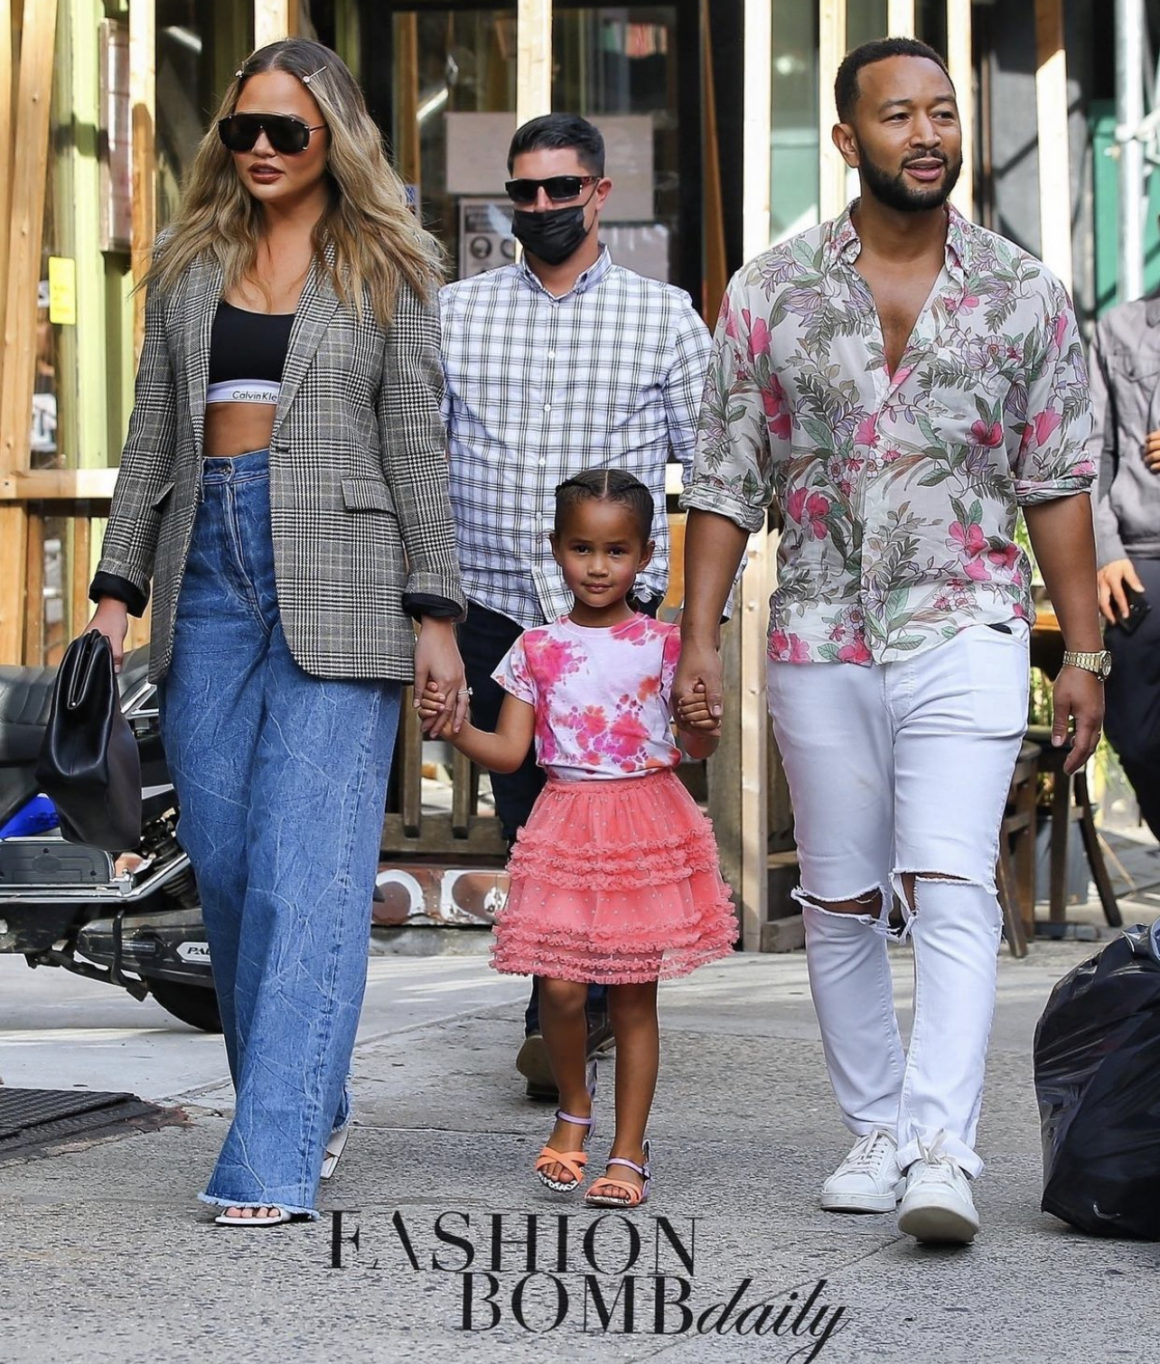 Chrissy Teigen Spotted on Family Outing in SoHo With John Legend and Daughter Luna Wearing Casual Chic Look